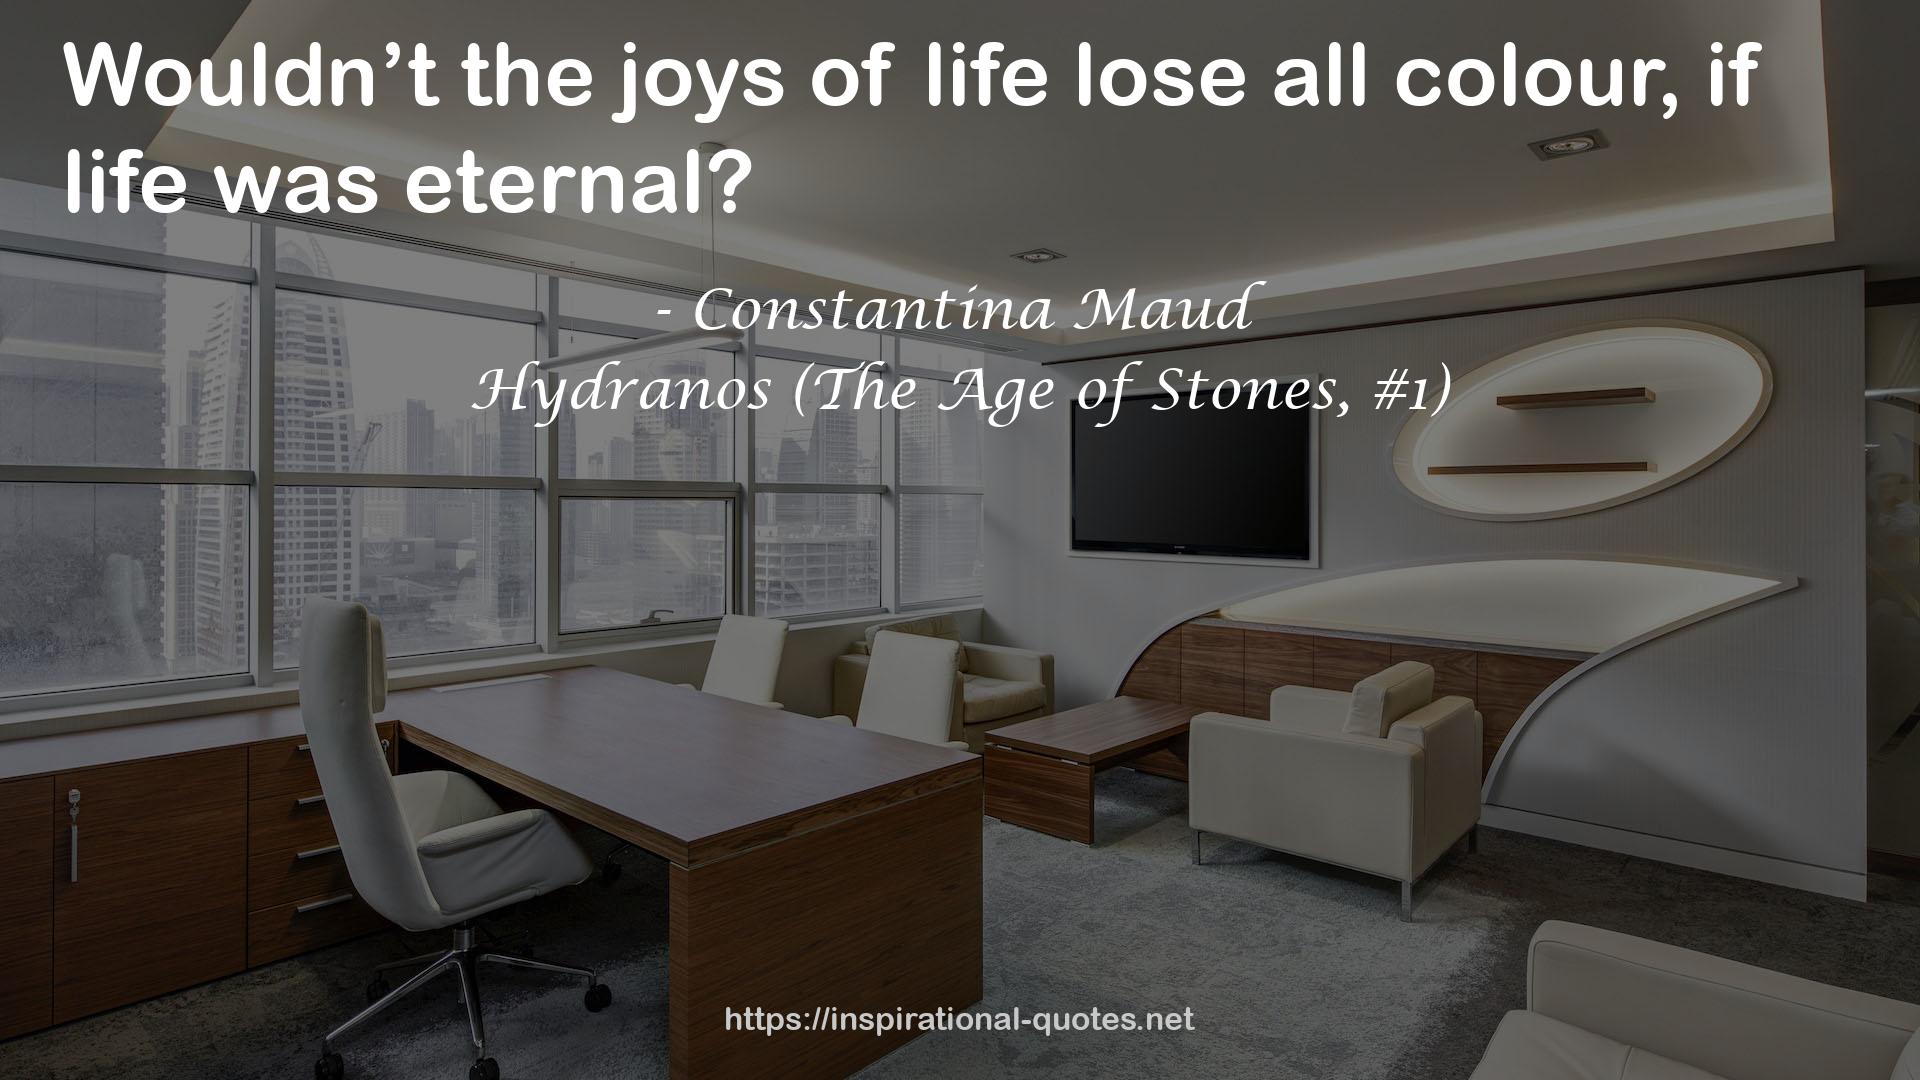 Hydranos (The Age of Stones, #1) QUOTES